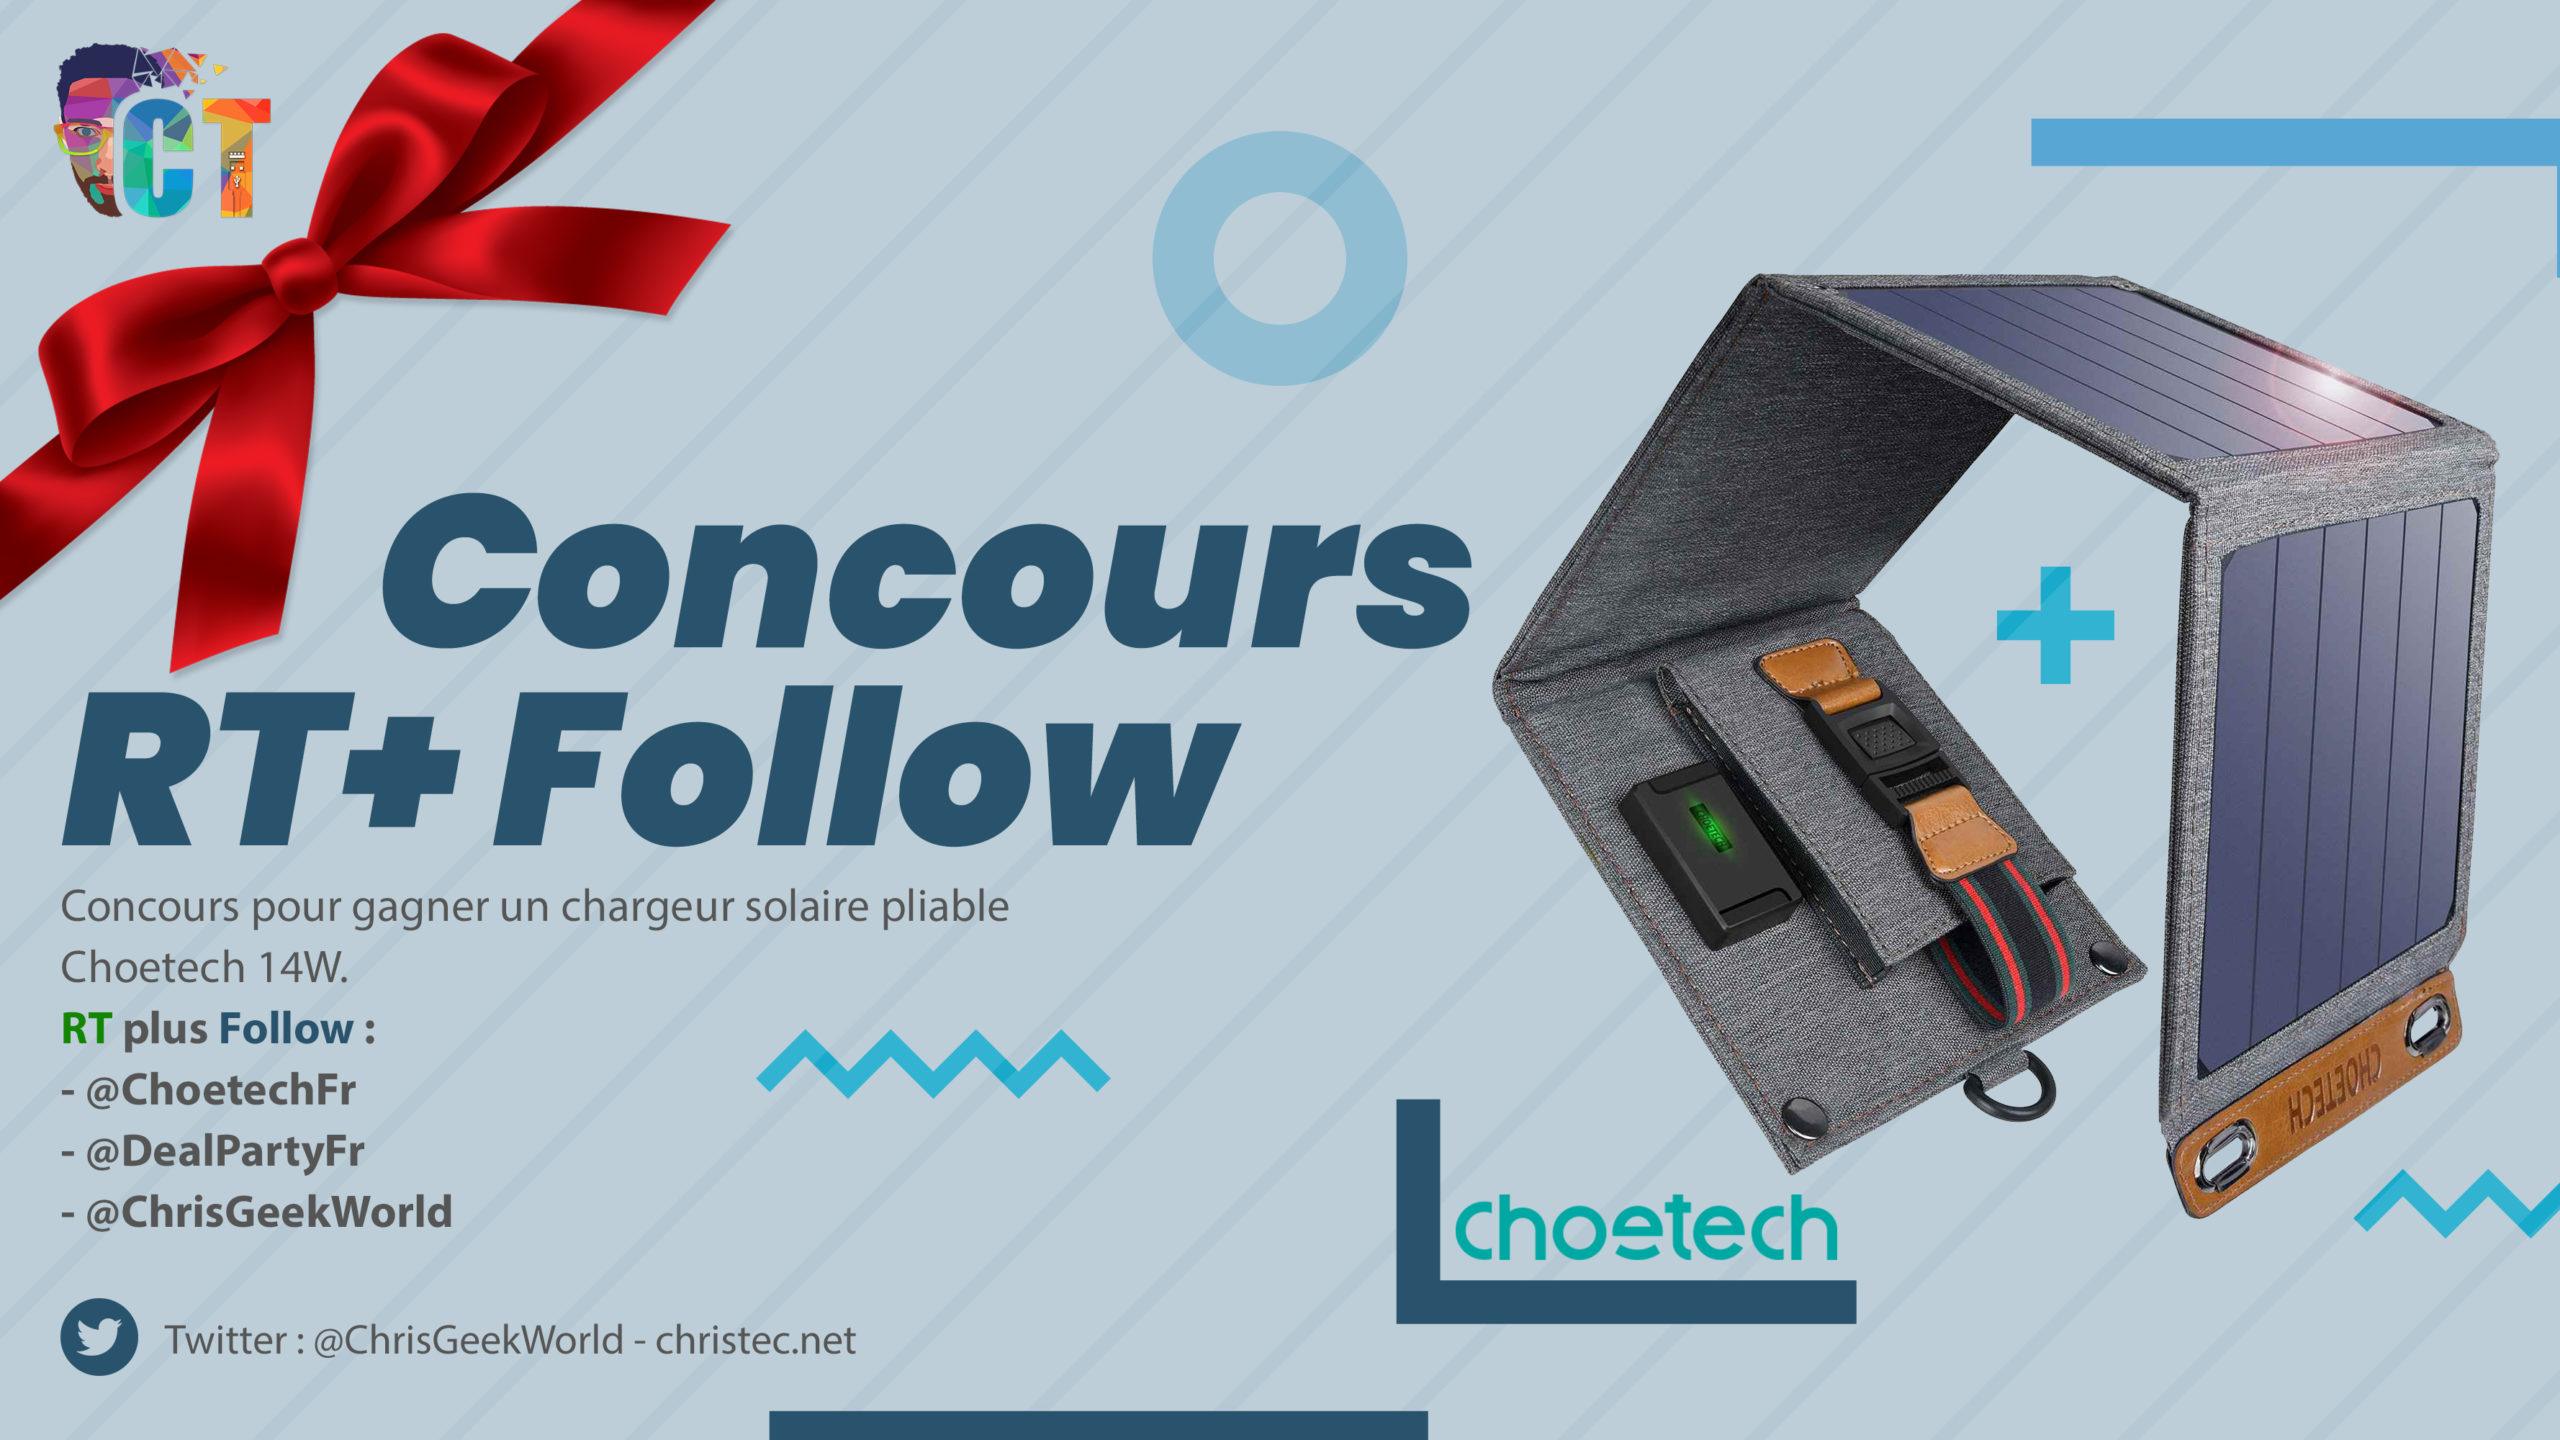 Concours twitter pour gagner 2 SwitchBot Meter Plus + 2 Hub Mini